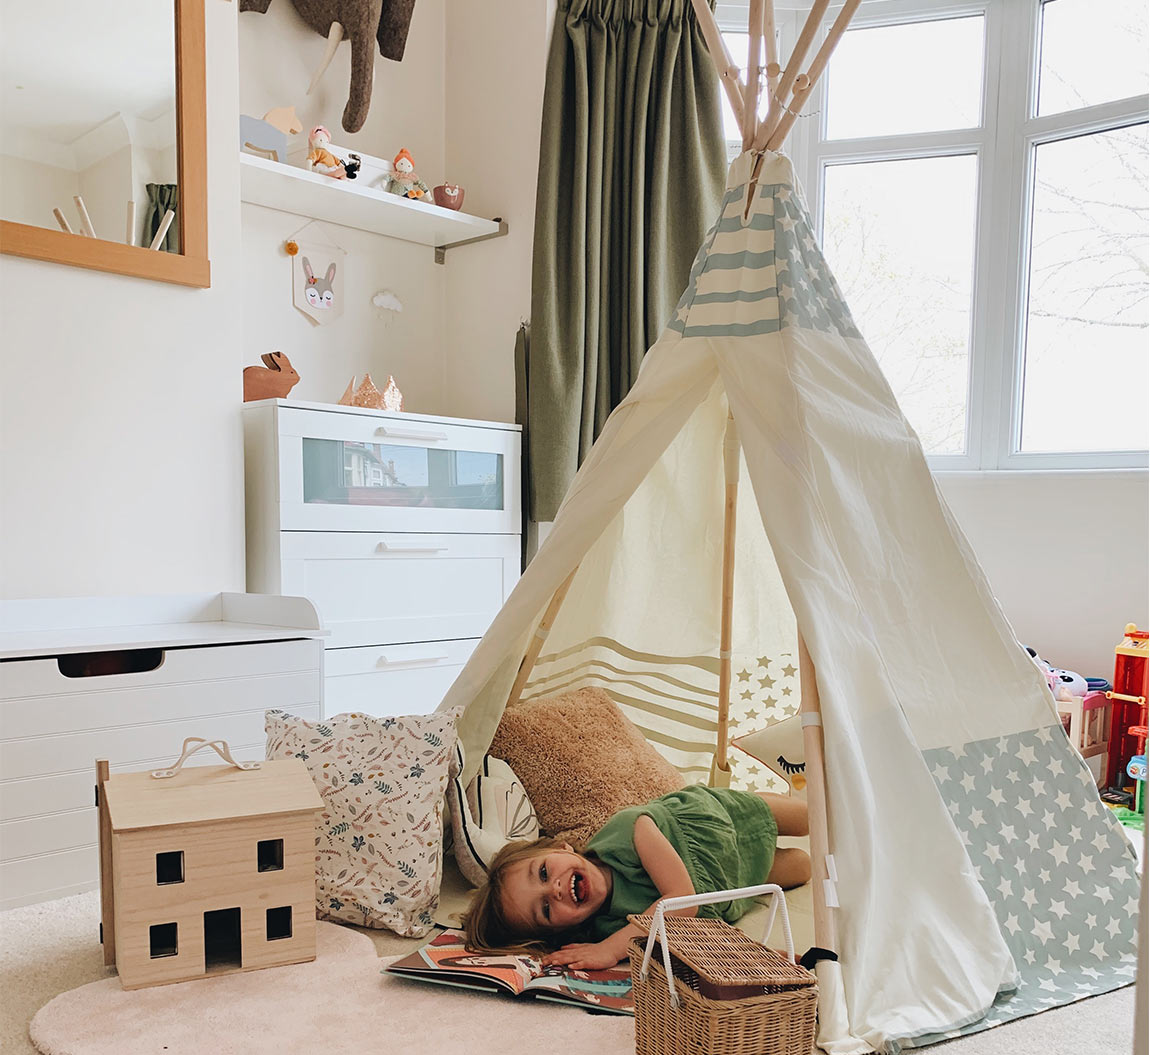 Load image into Gallery viewer, Apple Mist Teepee Wigwam Play Tent
